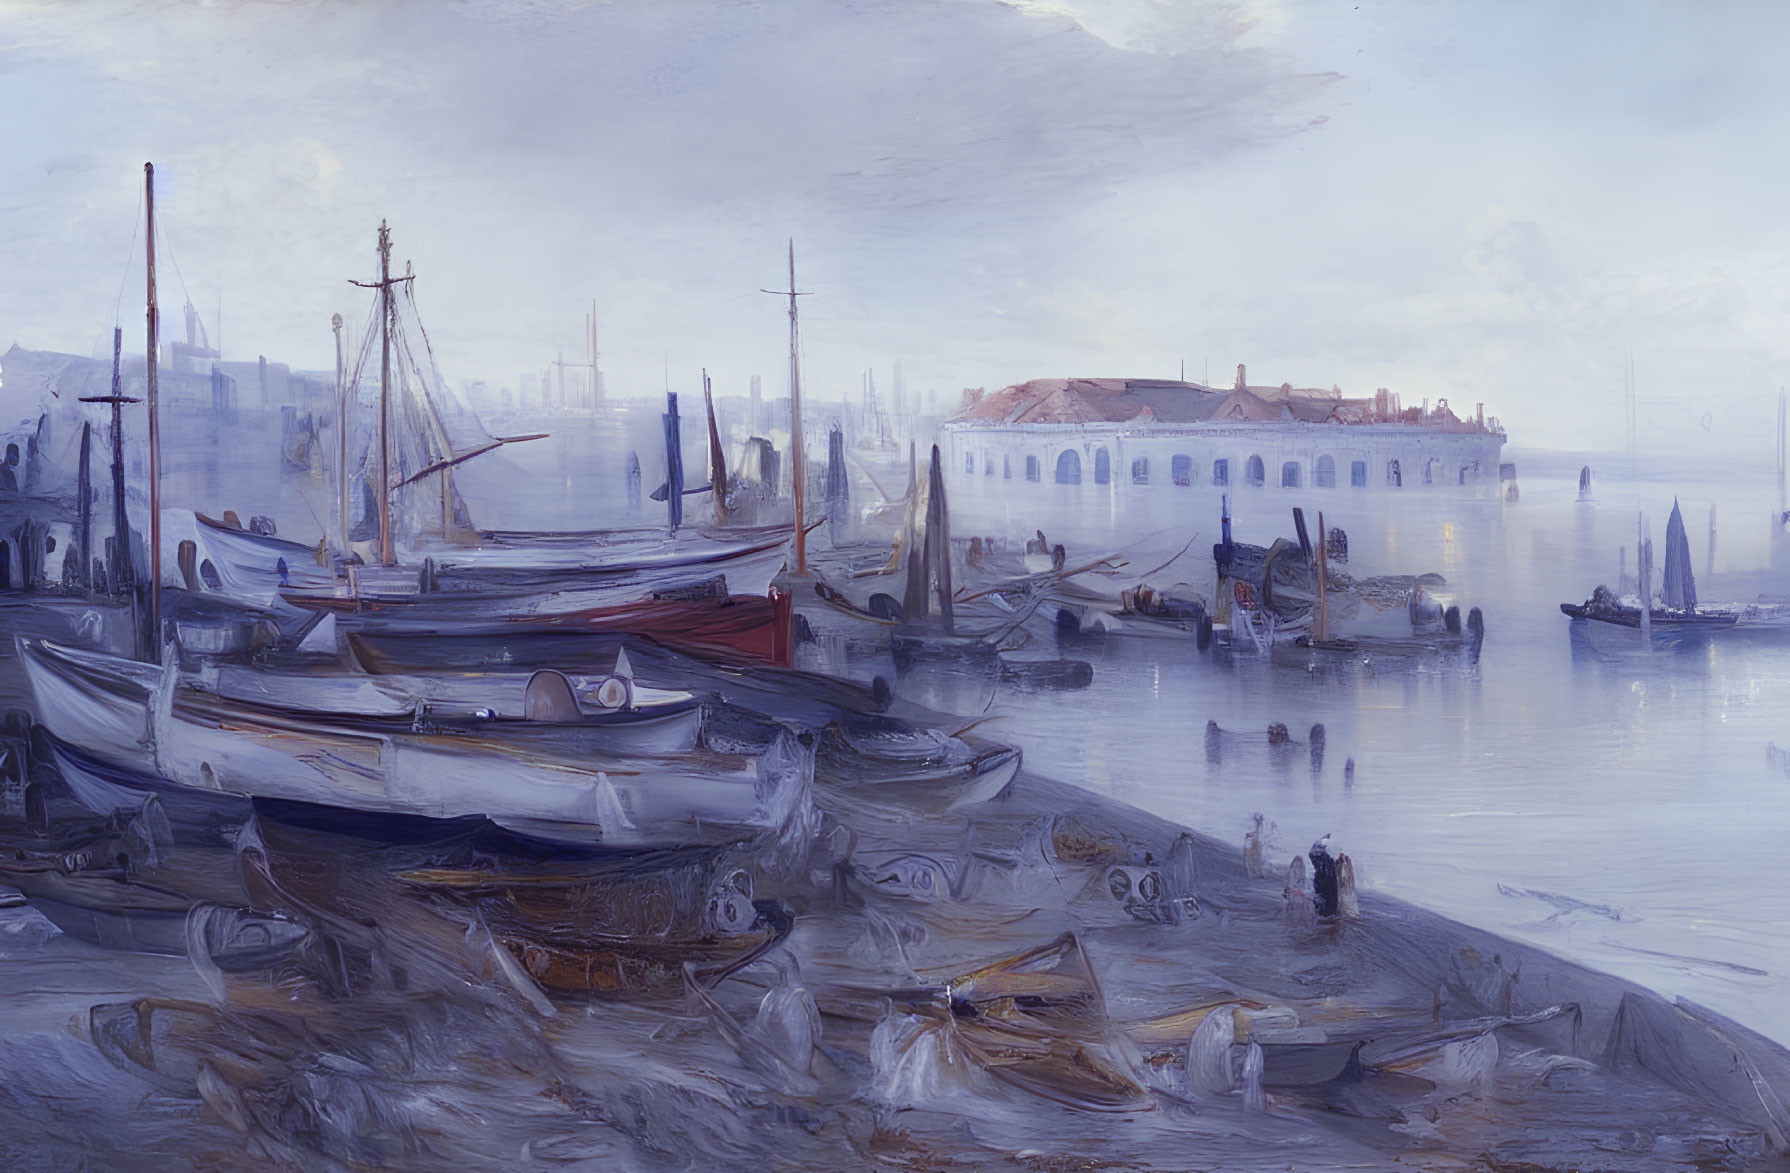 Misty port scene with moored boats and figures under hazy sky